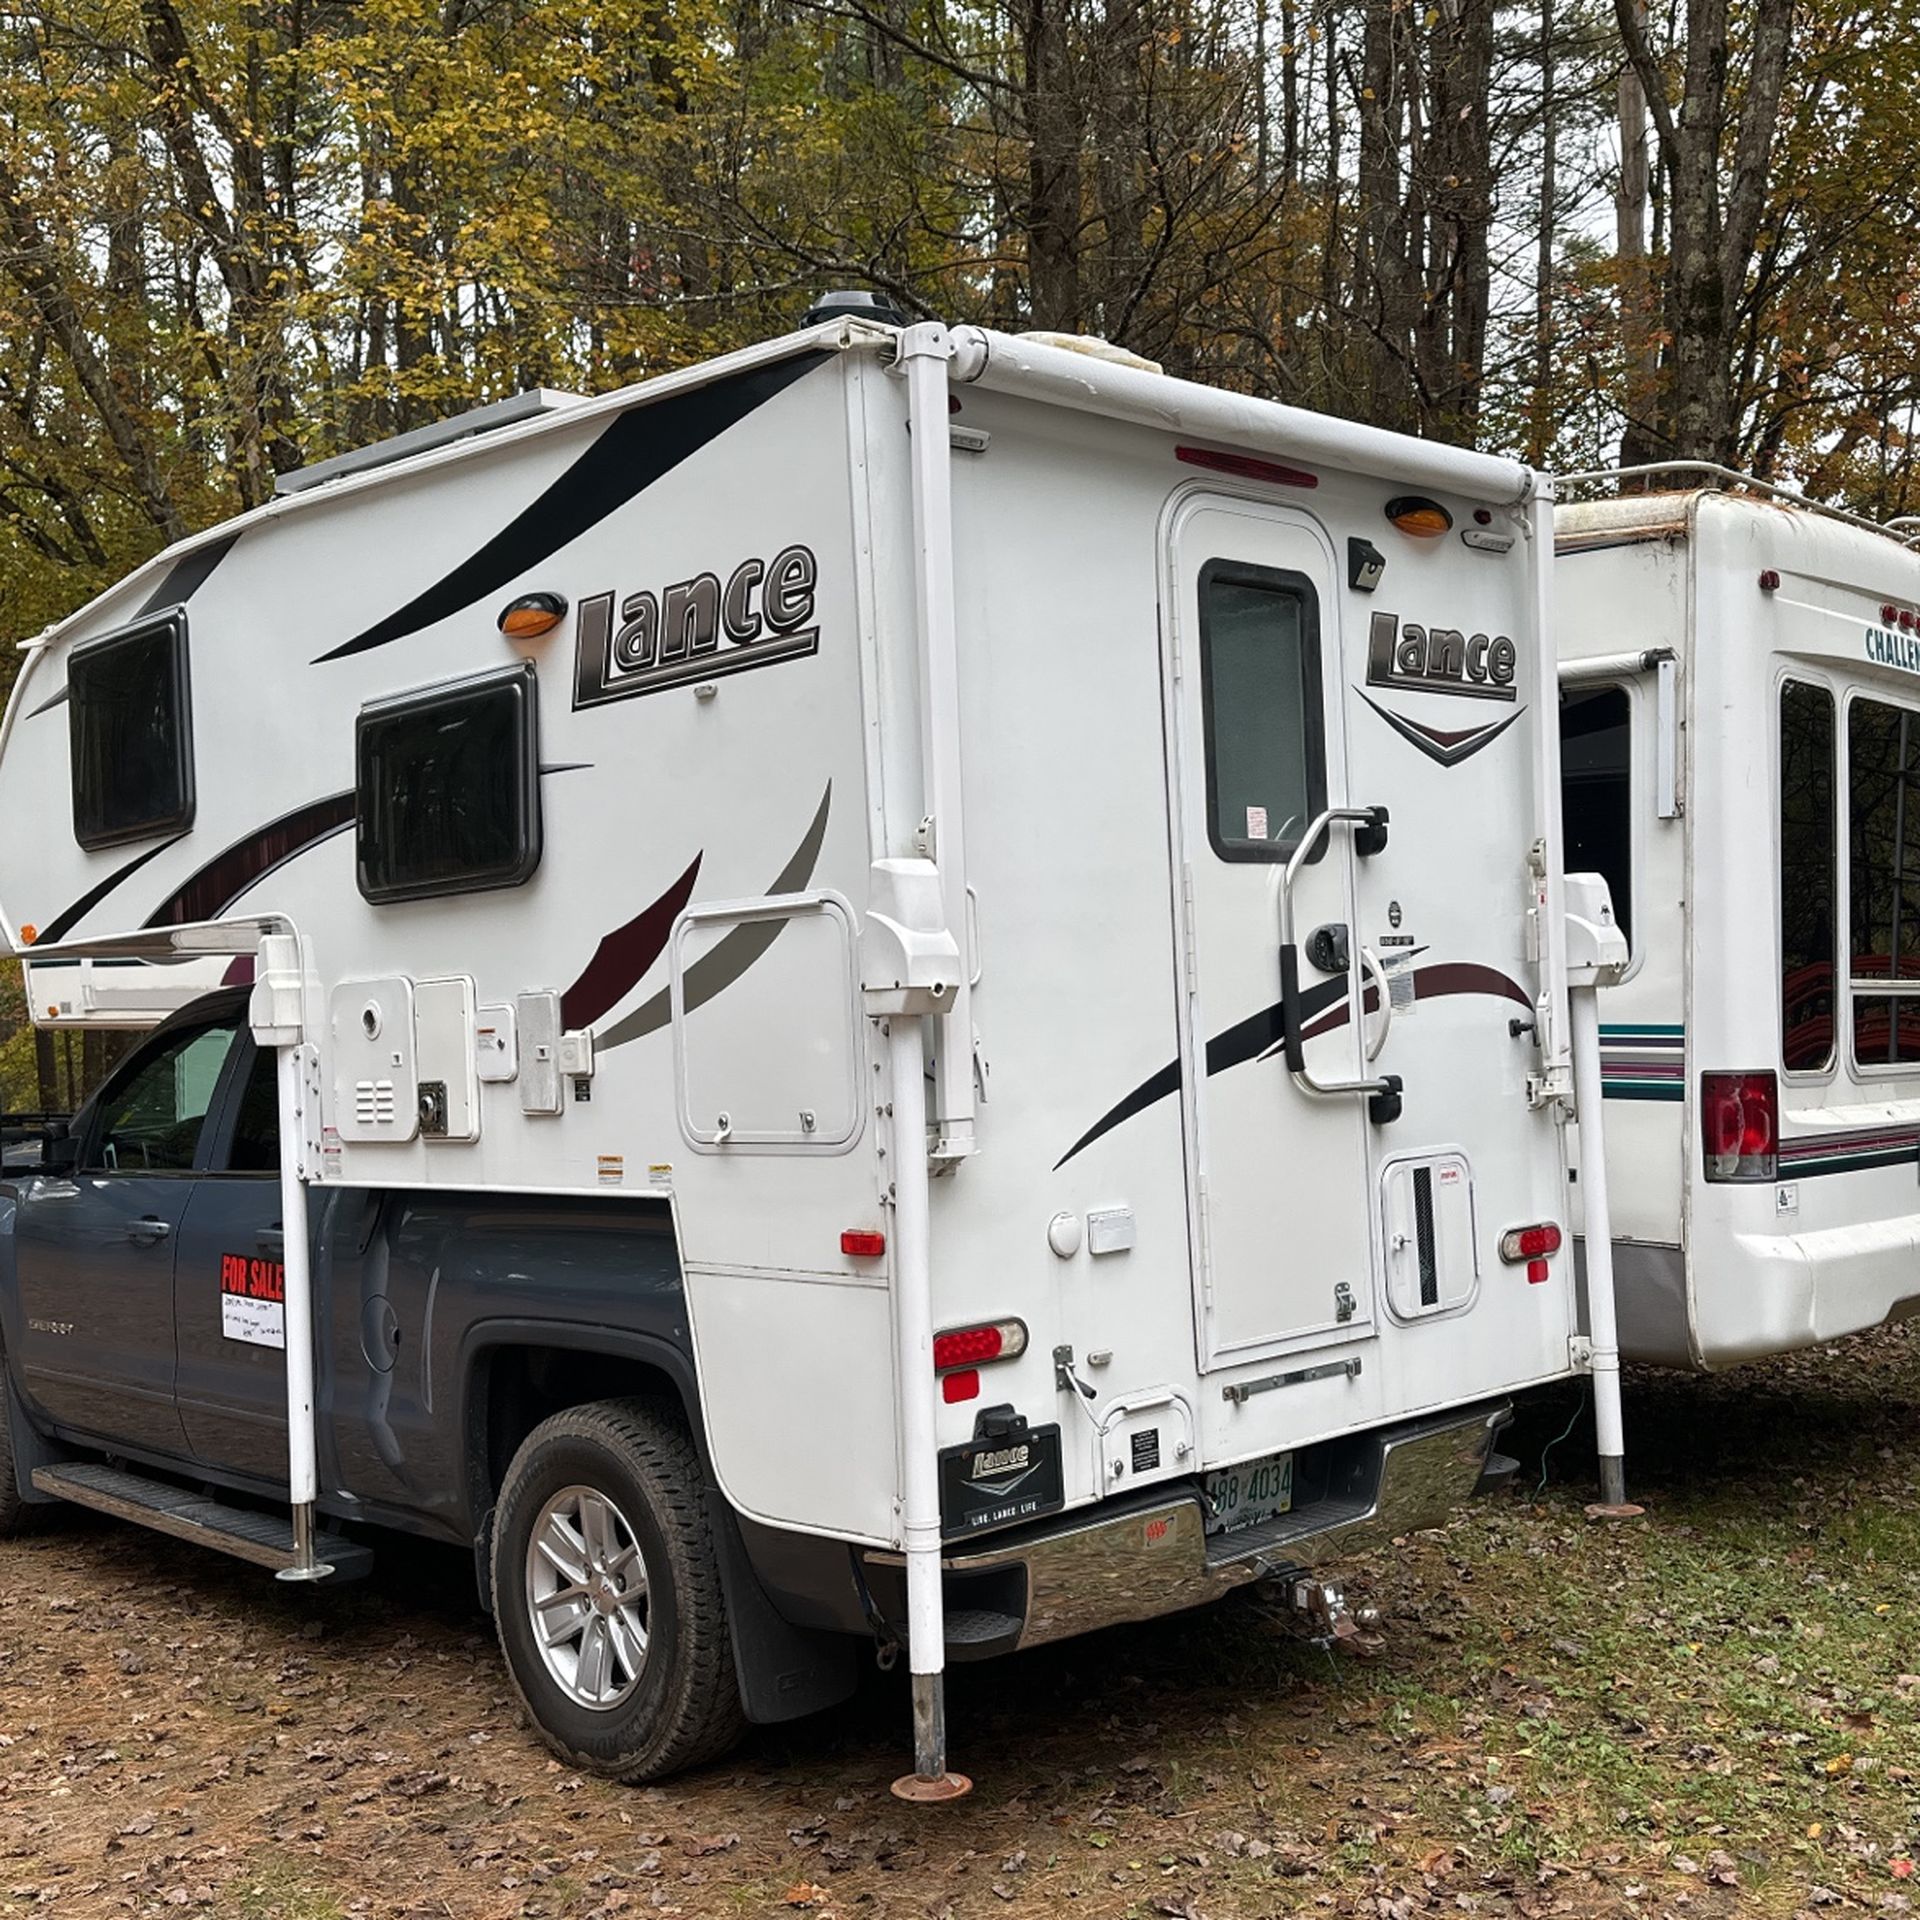 2017 Lance 650-6’-10” self contained has a/c max air roof vent 18000 btu heater does not need to be registered !great for weekend camping trips !